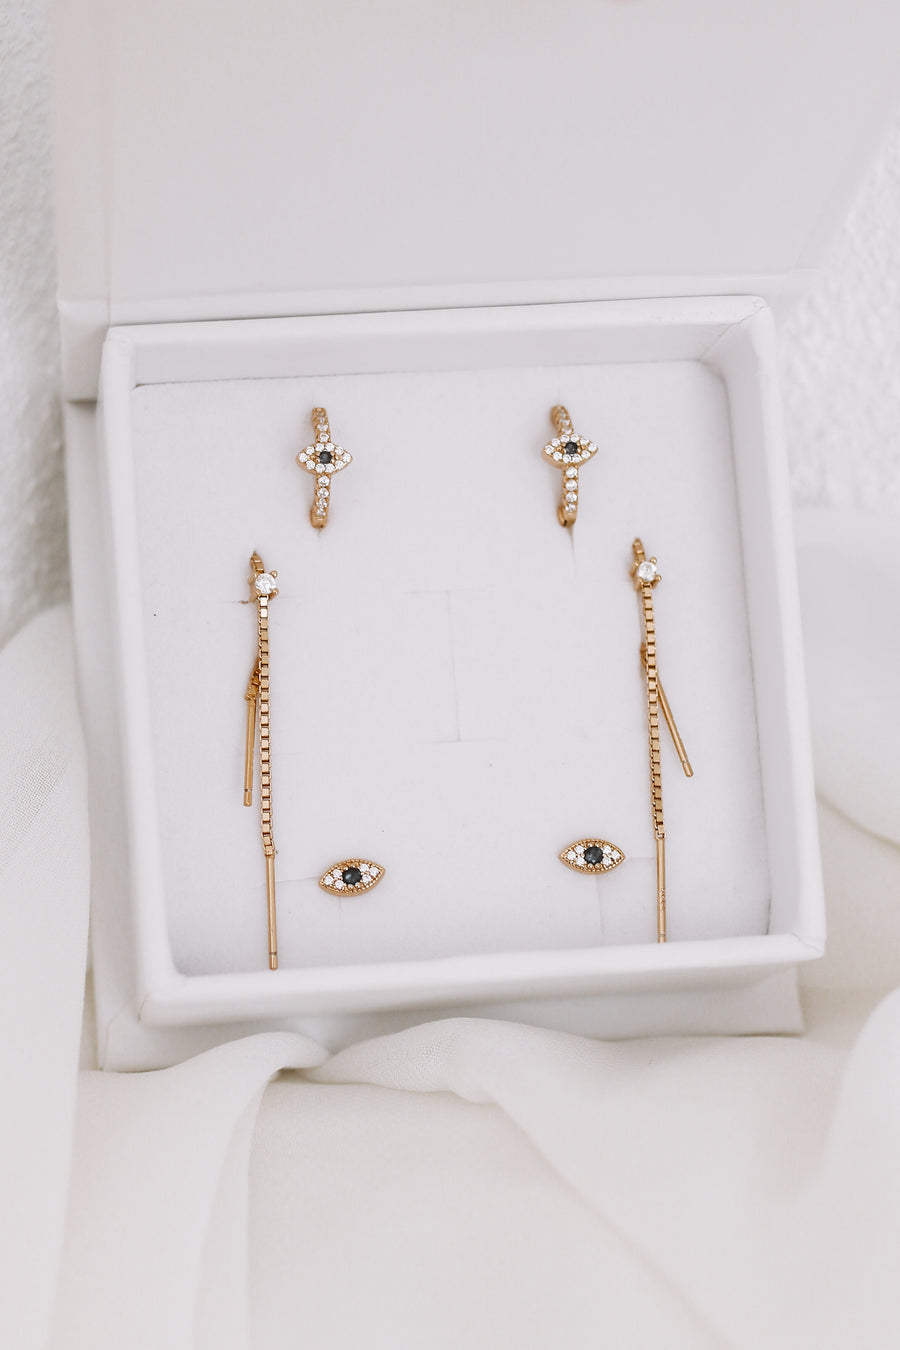 Collette Bundle - Gold or Silver Sterling Silver Earring Stack